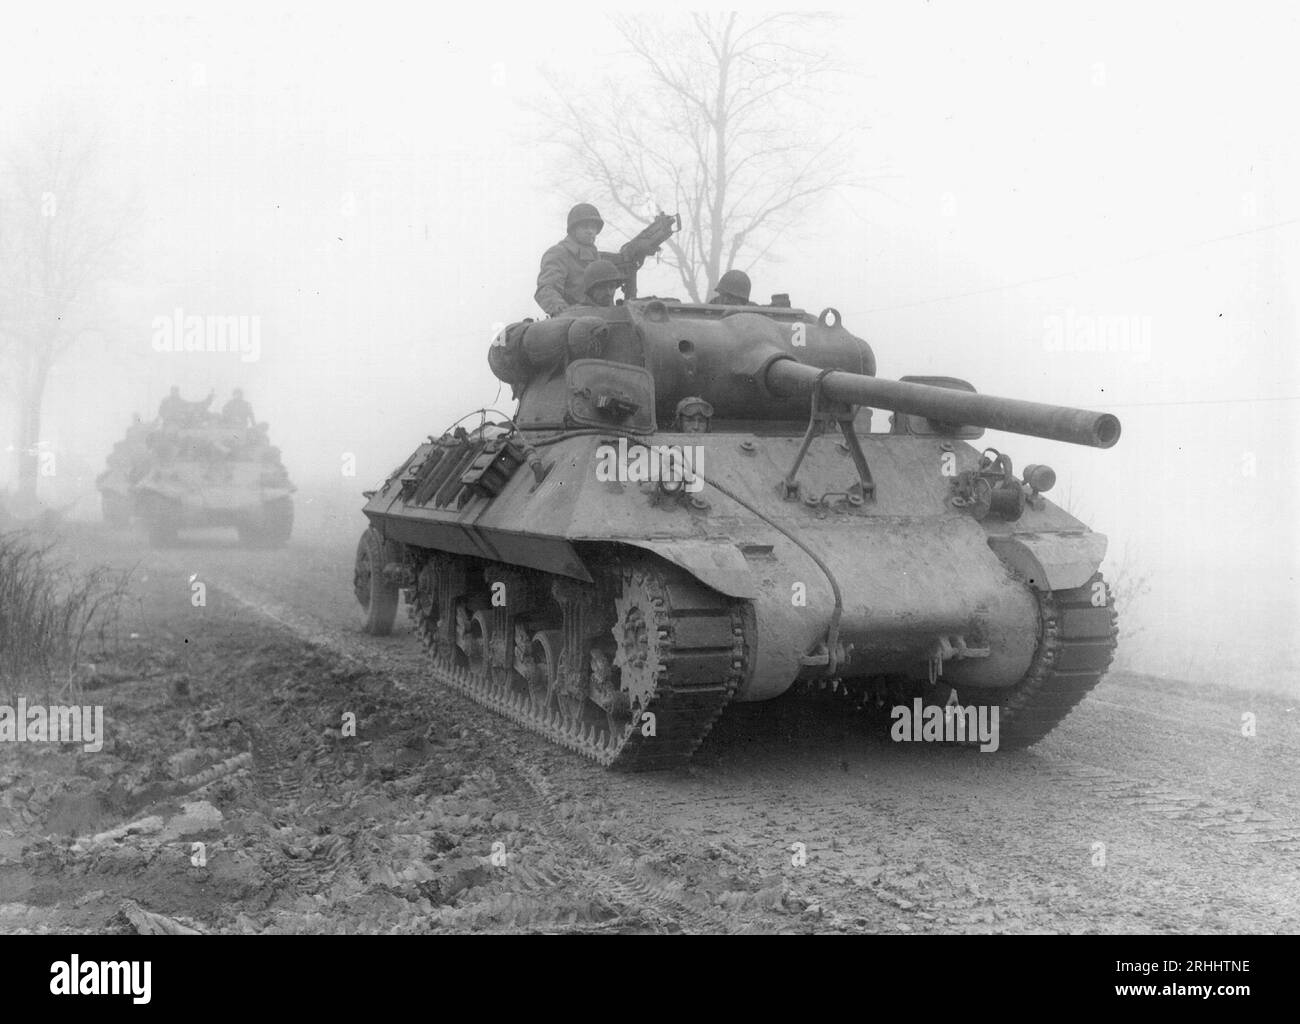 BELGIUM - December 1944 - A column of US Army tanks advances through Belgium, during a major German counter-attack which later became known as the 'Ba Stock Photo